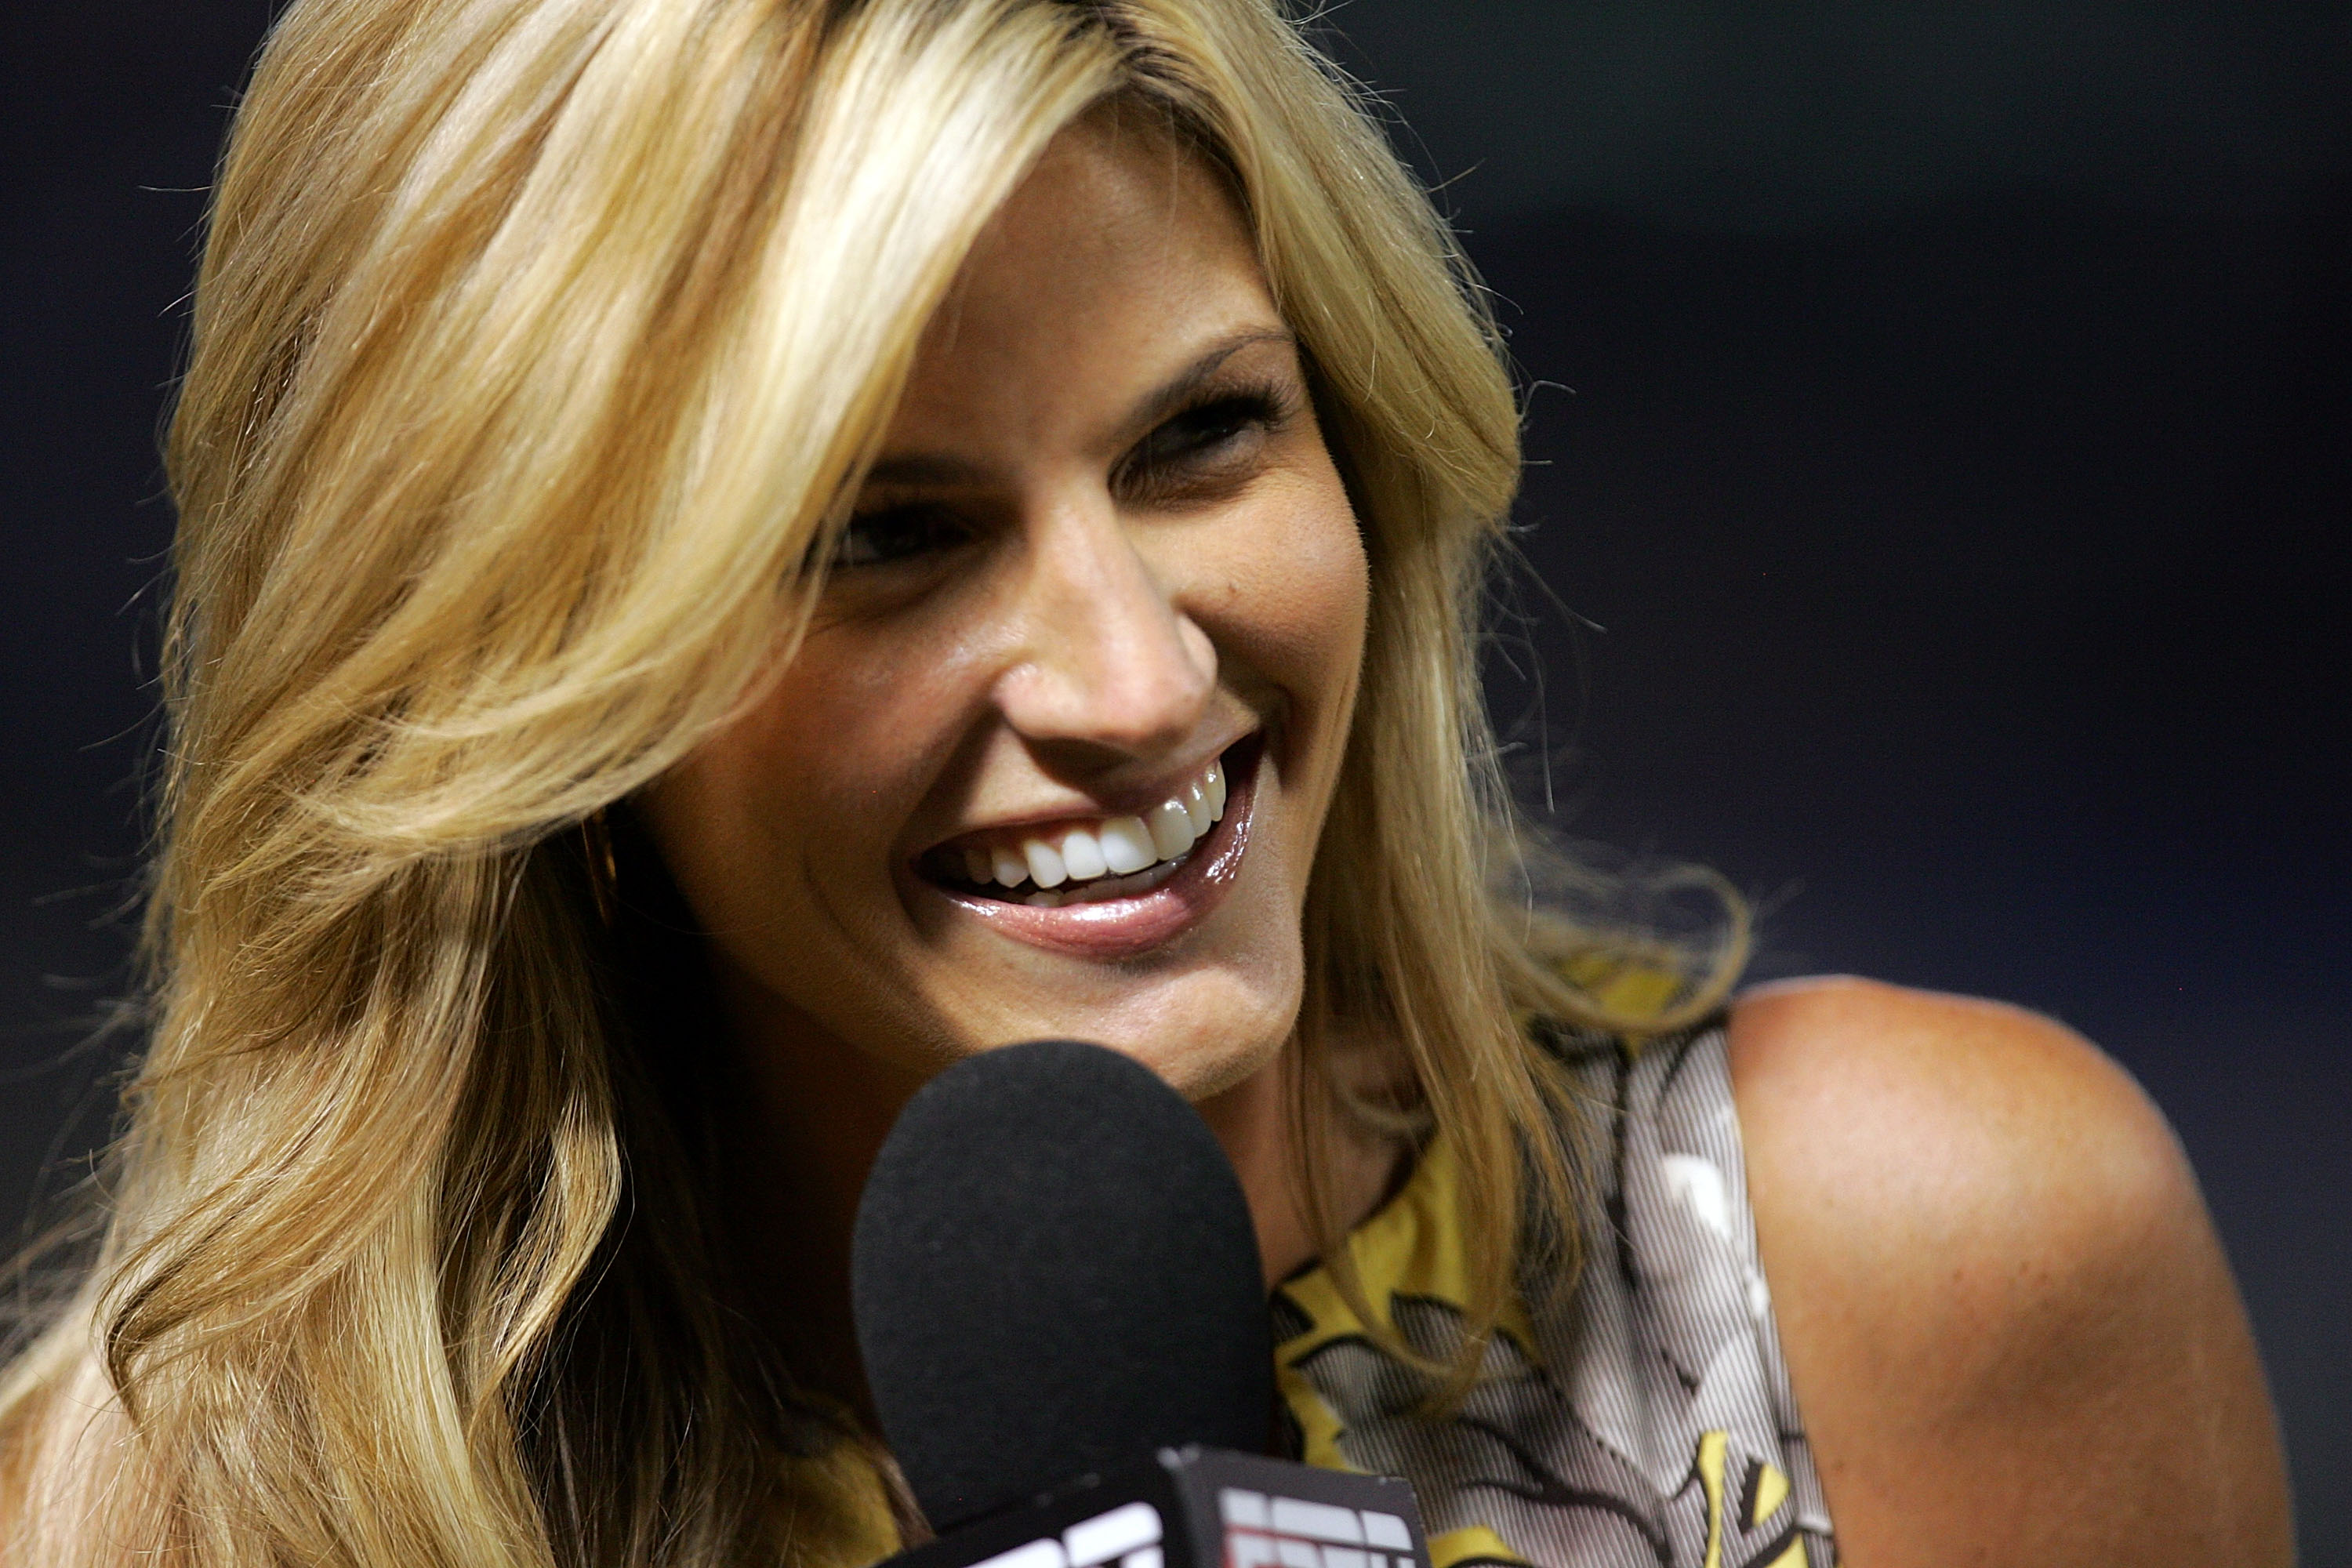 ARLINGTON, TX - AUGUST 06:  ESPN reporter Erin Andrews during a game between the New York Yankees and the Texas Rangers on August 6, 2008 at Rangers Ballpark in Arlington, Texas.  (Photo by Ronald Martinez/Getty Images)